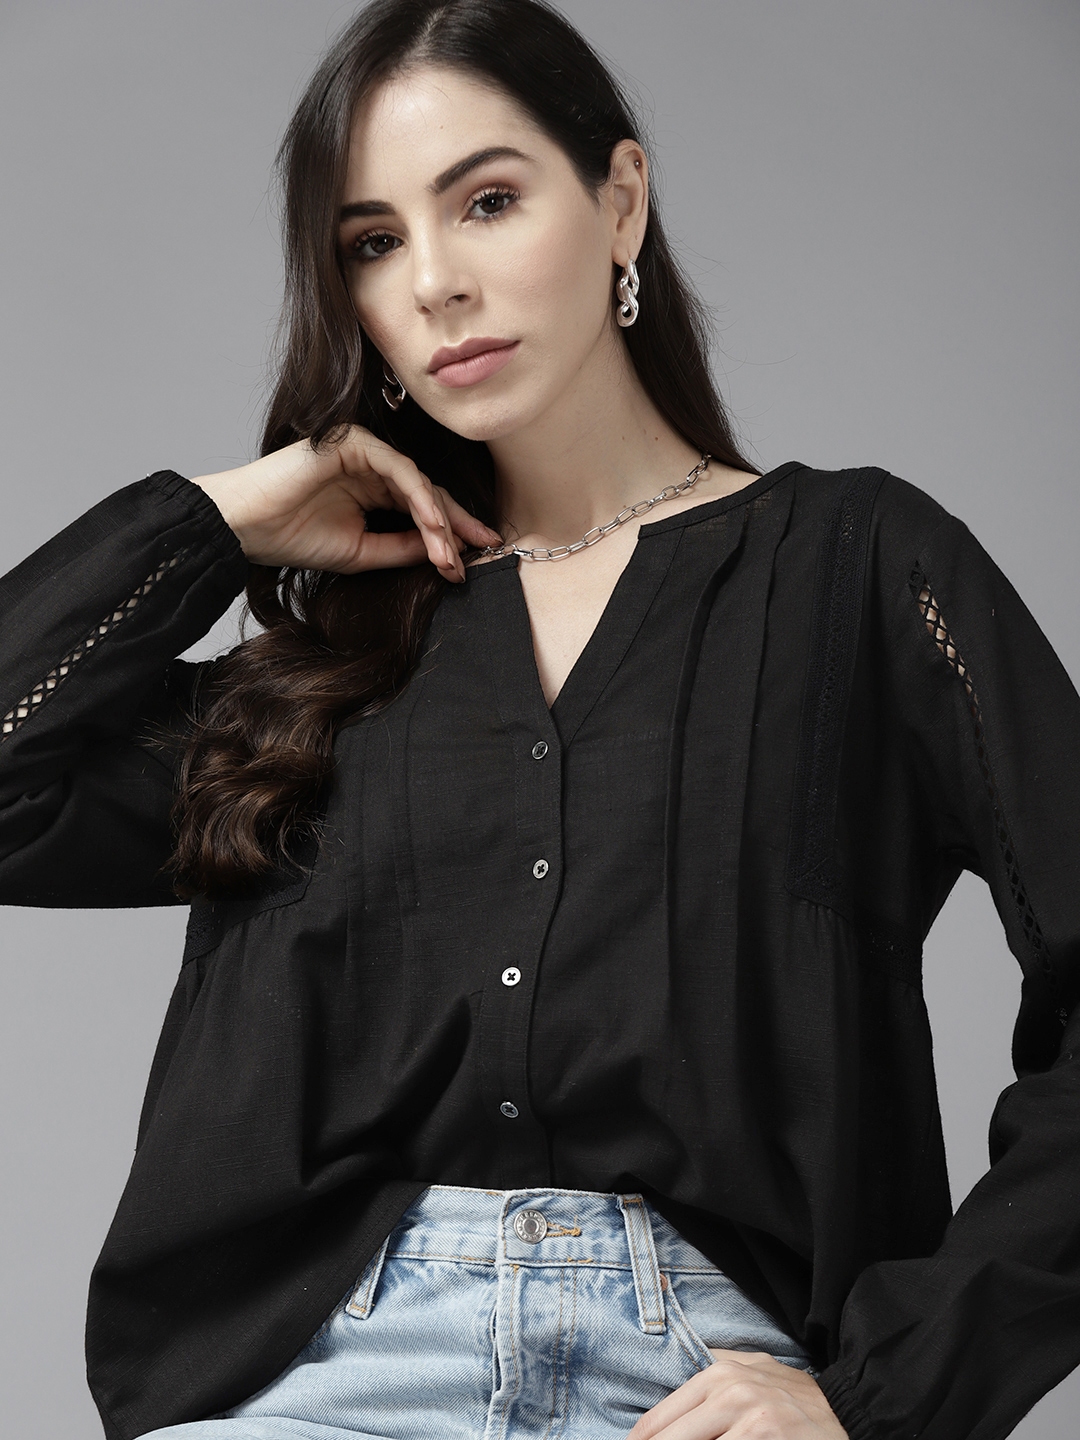 Buy Roadster Black Lace Detail Top - Tops for Women 19495840 | Myntra